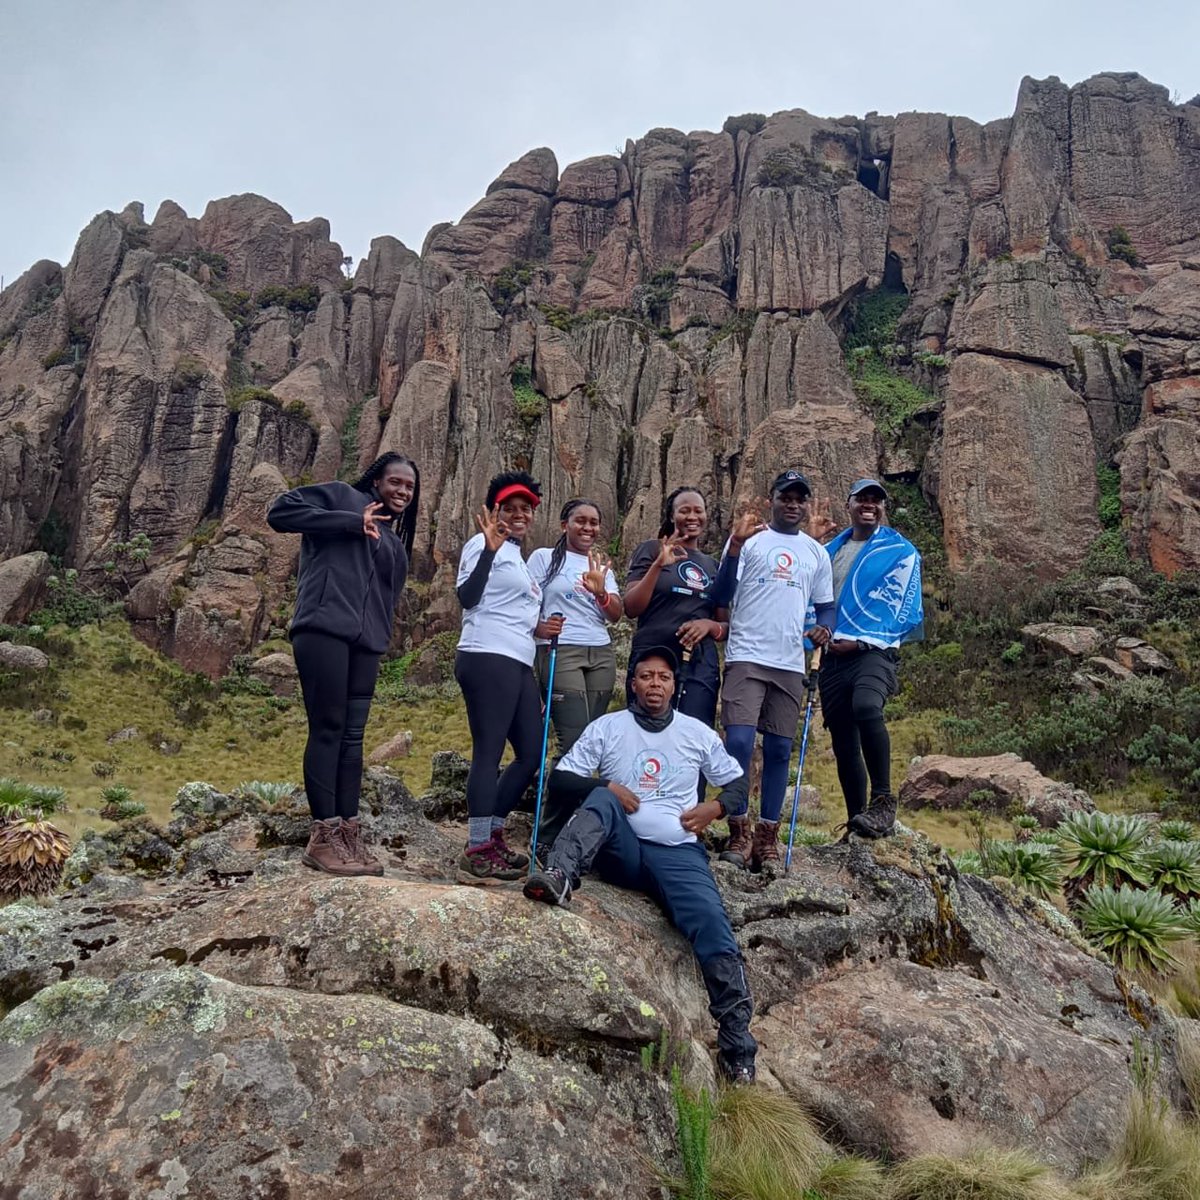 We came,we saw,we conquered
#heights4health
#O3plus